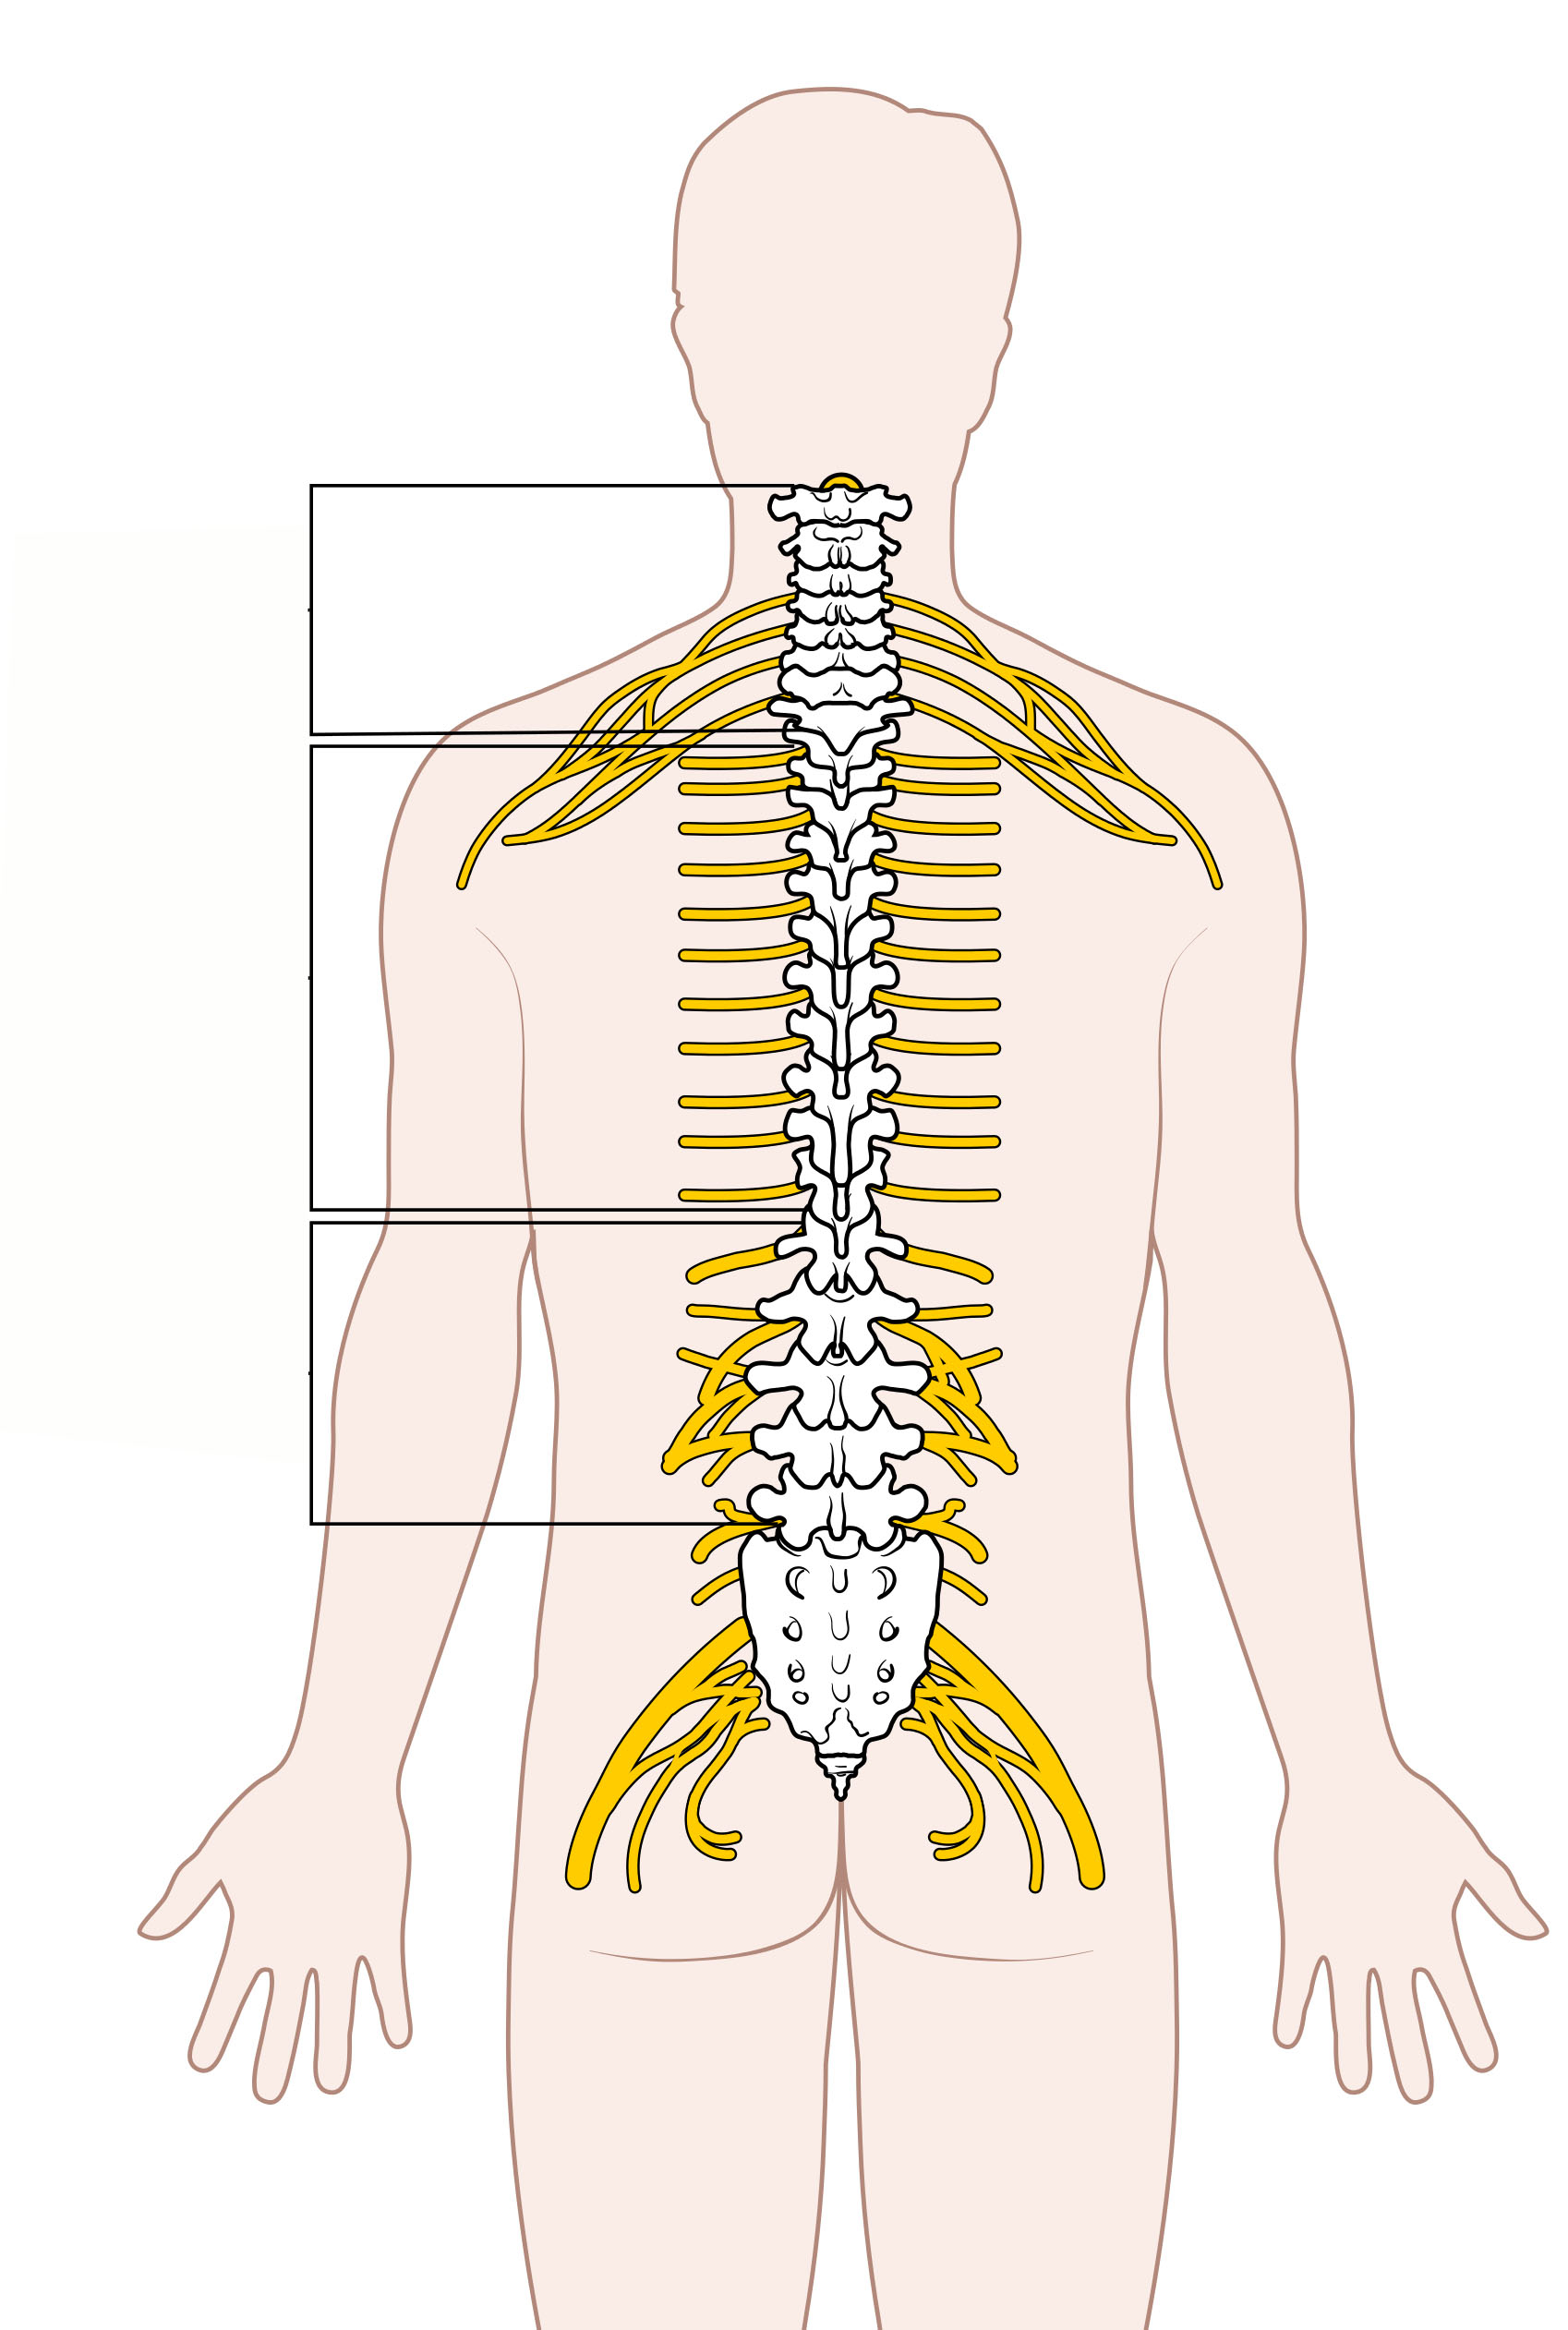 Spinal Cord Diagram Filediagram Of The Spinal Cord Unlabeled Wikimedia Commons